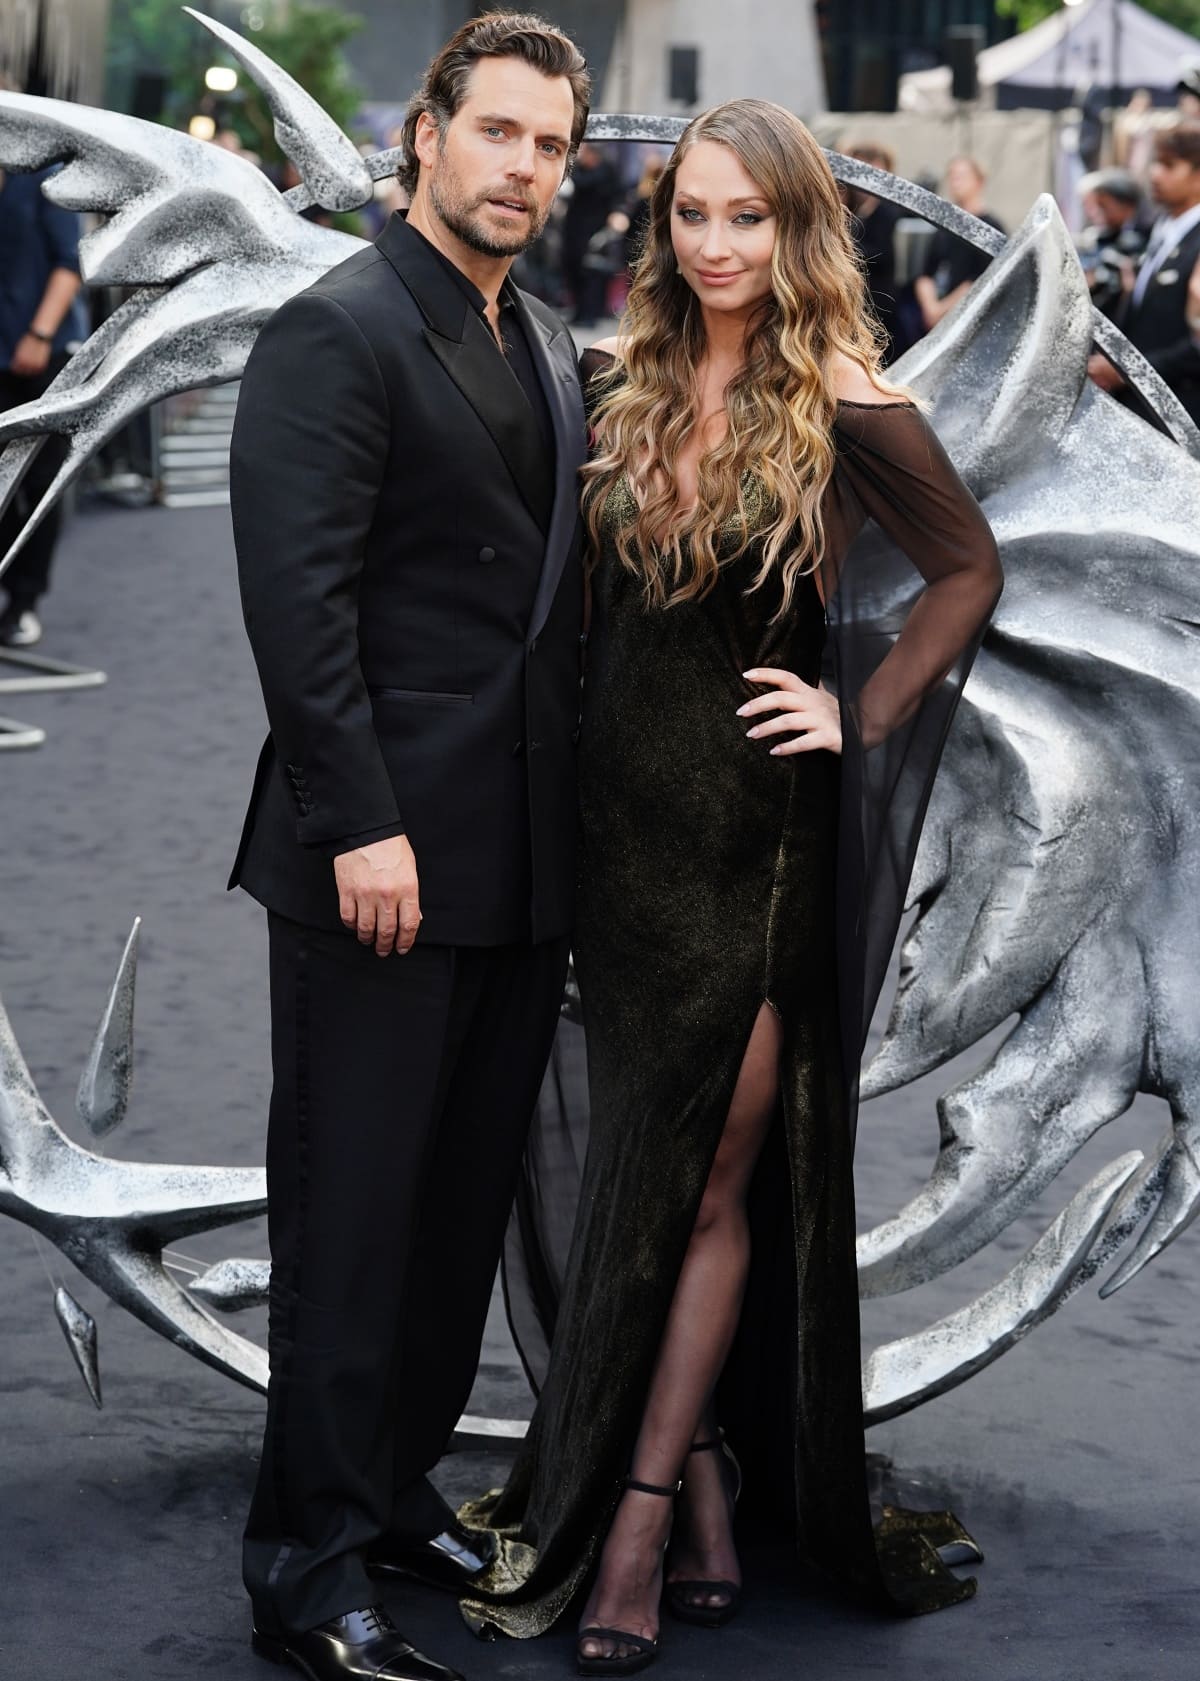 Not to be outdone, Natalie Viscuso matched her boyfriend Henry Cavill’s all-black look and added touches of metallic gold plus a plunging neckline and a thigh-high slit for a head-turning entrance